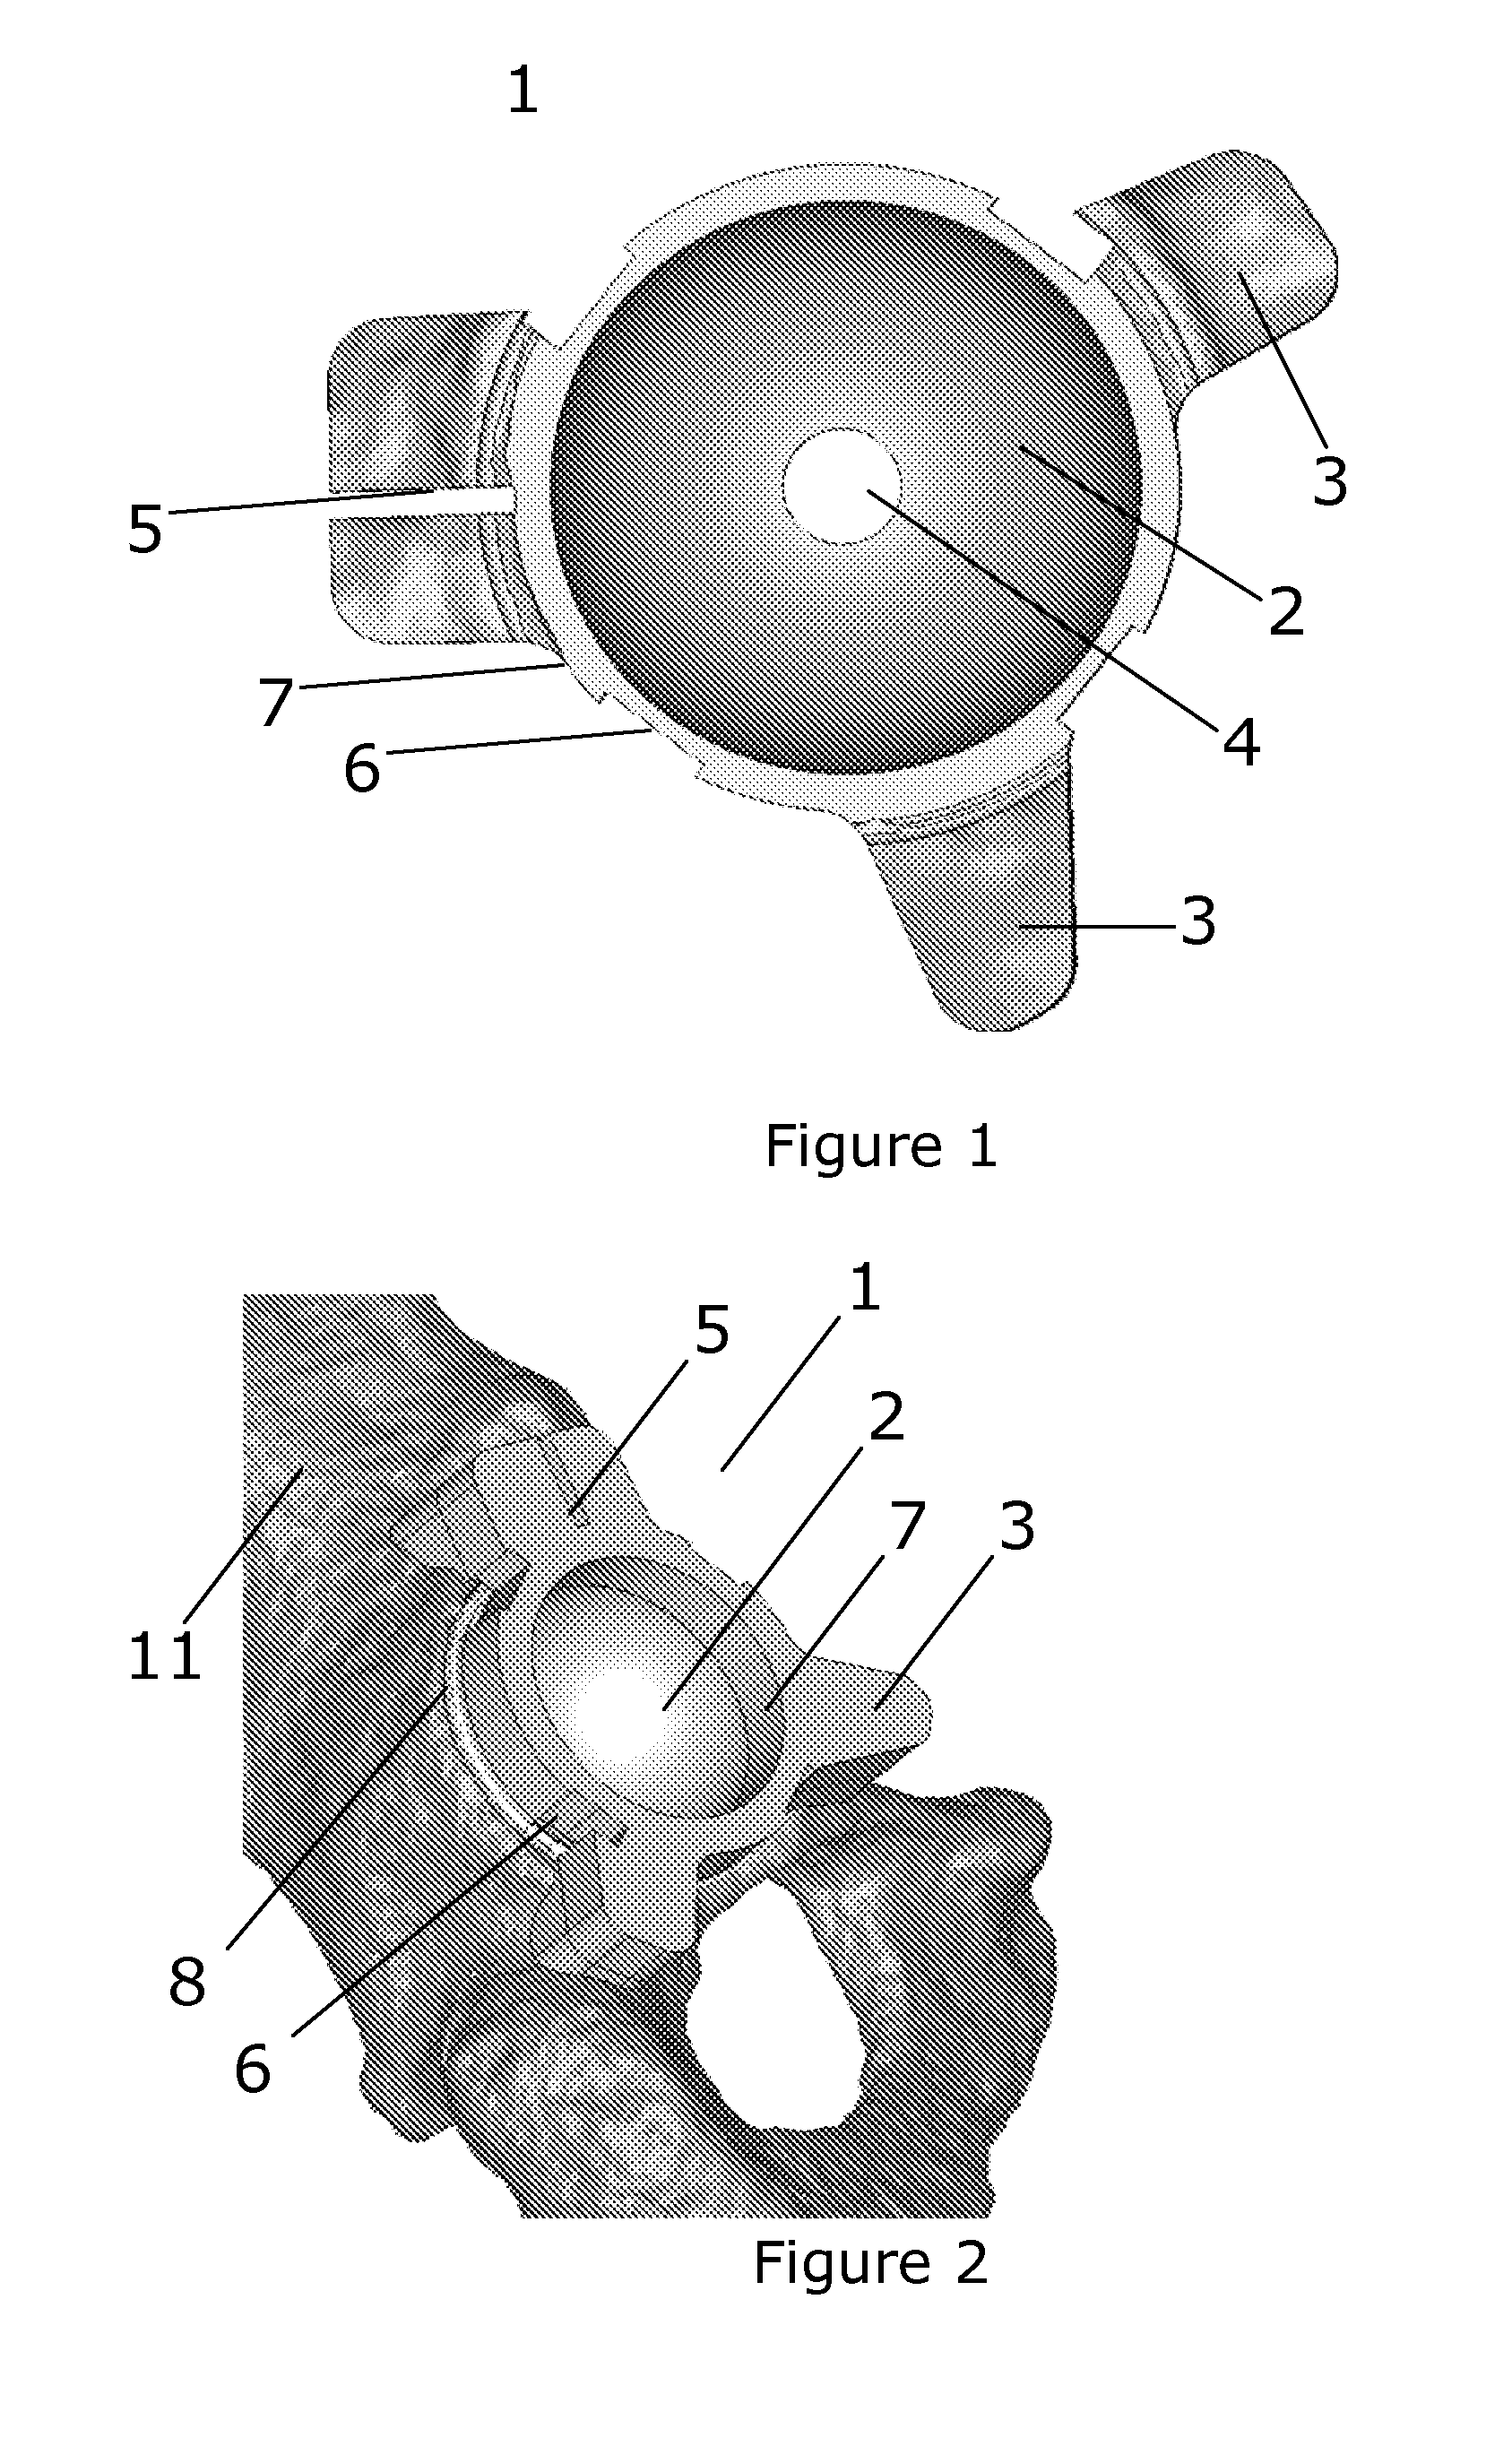 Guiding instruments and impactors for an acetabular cup implant, combinations thereof, methods for manufacturing and uses thereof